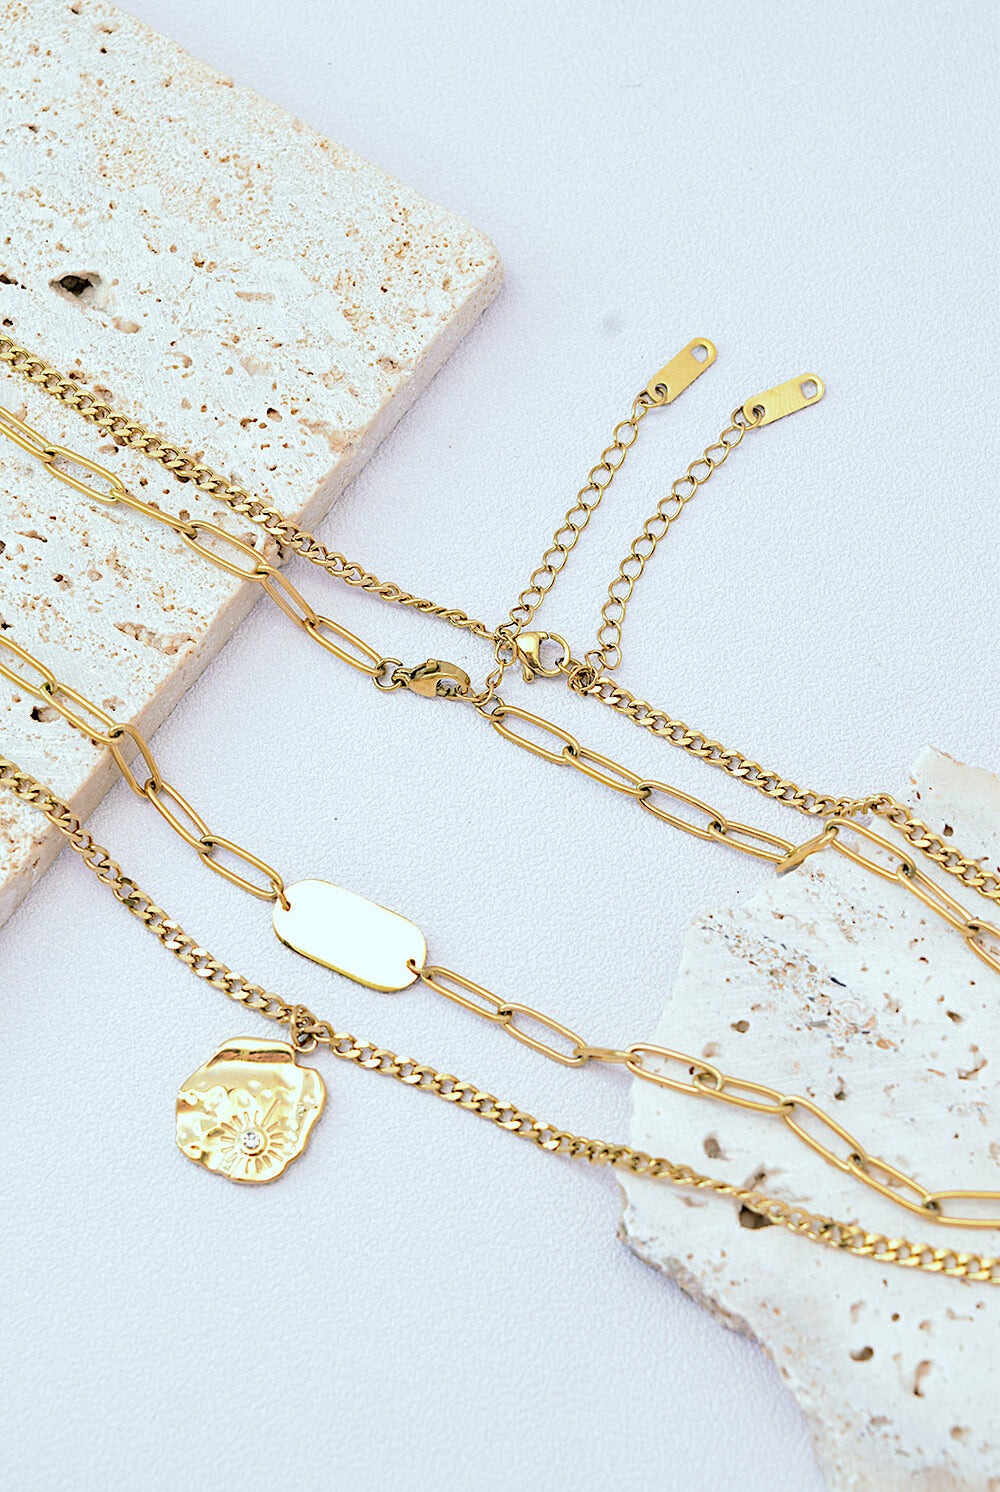 Gold-plated double-layered necklace featuring a bar detail on the upper chain and a detailed circular pendant on the lower chain, set against a white background.